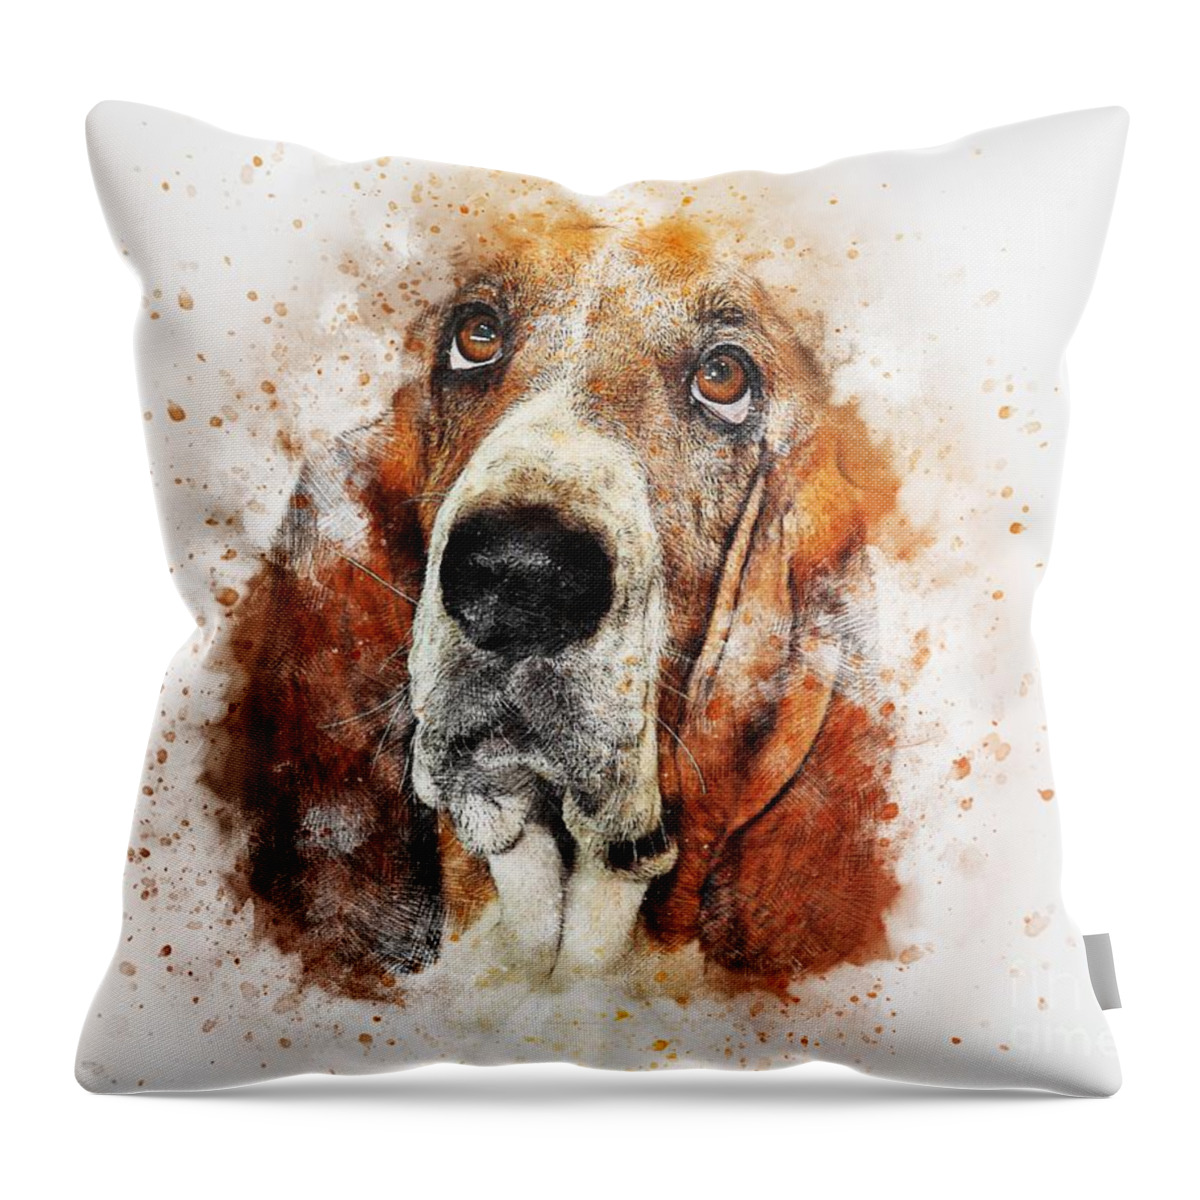 Dog Throw Pillow featuring the digital art We Will Make It Through by Kathy Tarochione